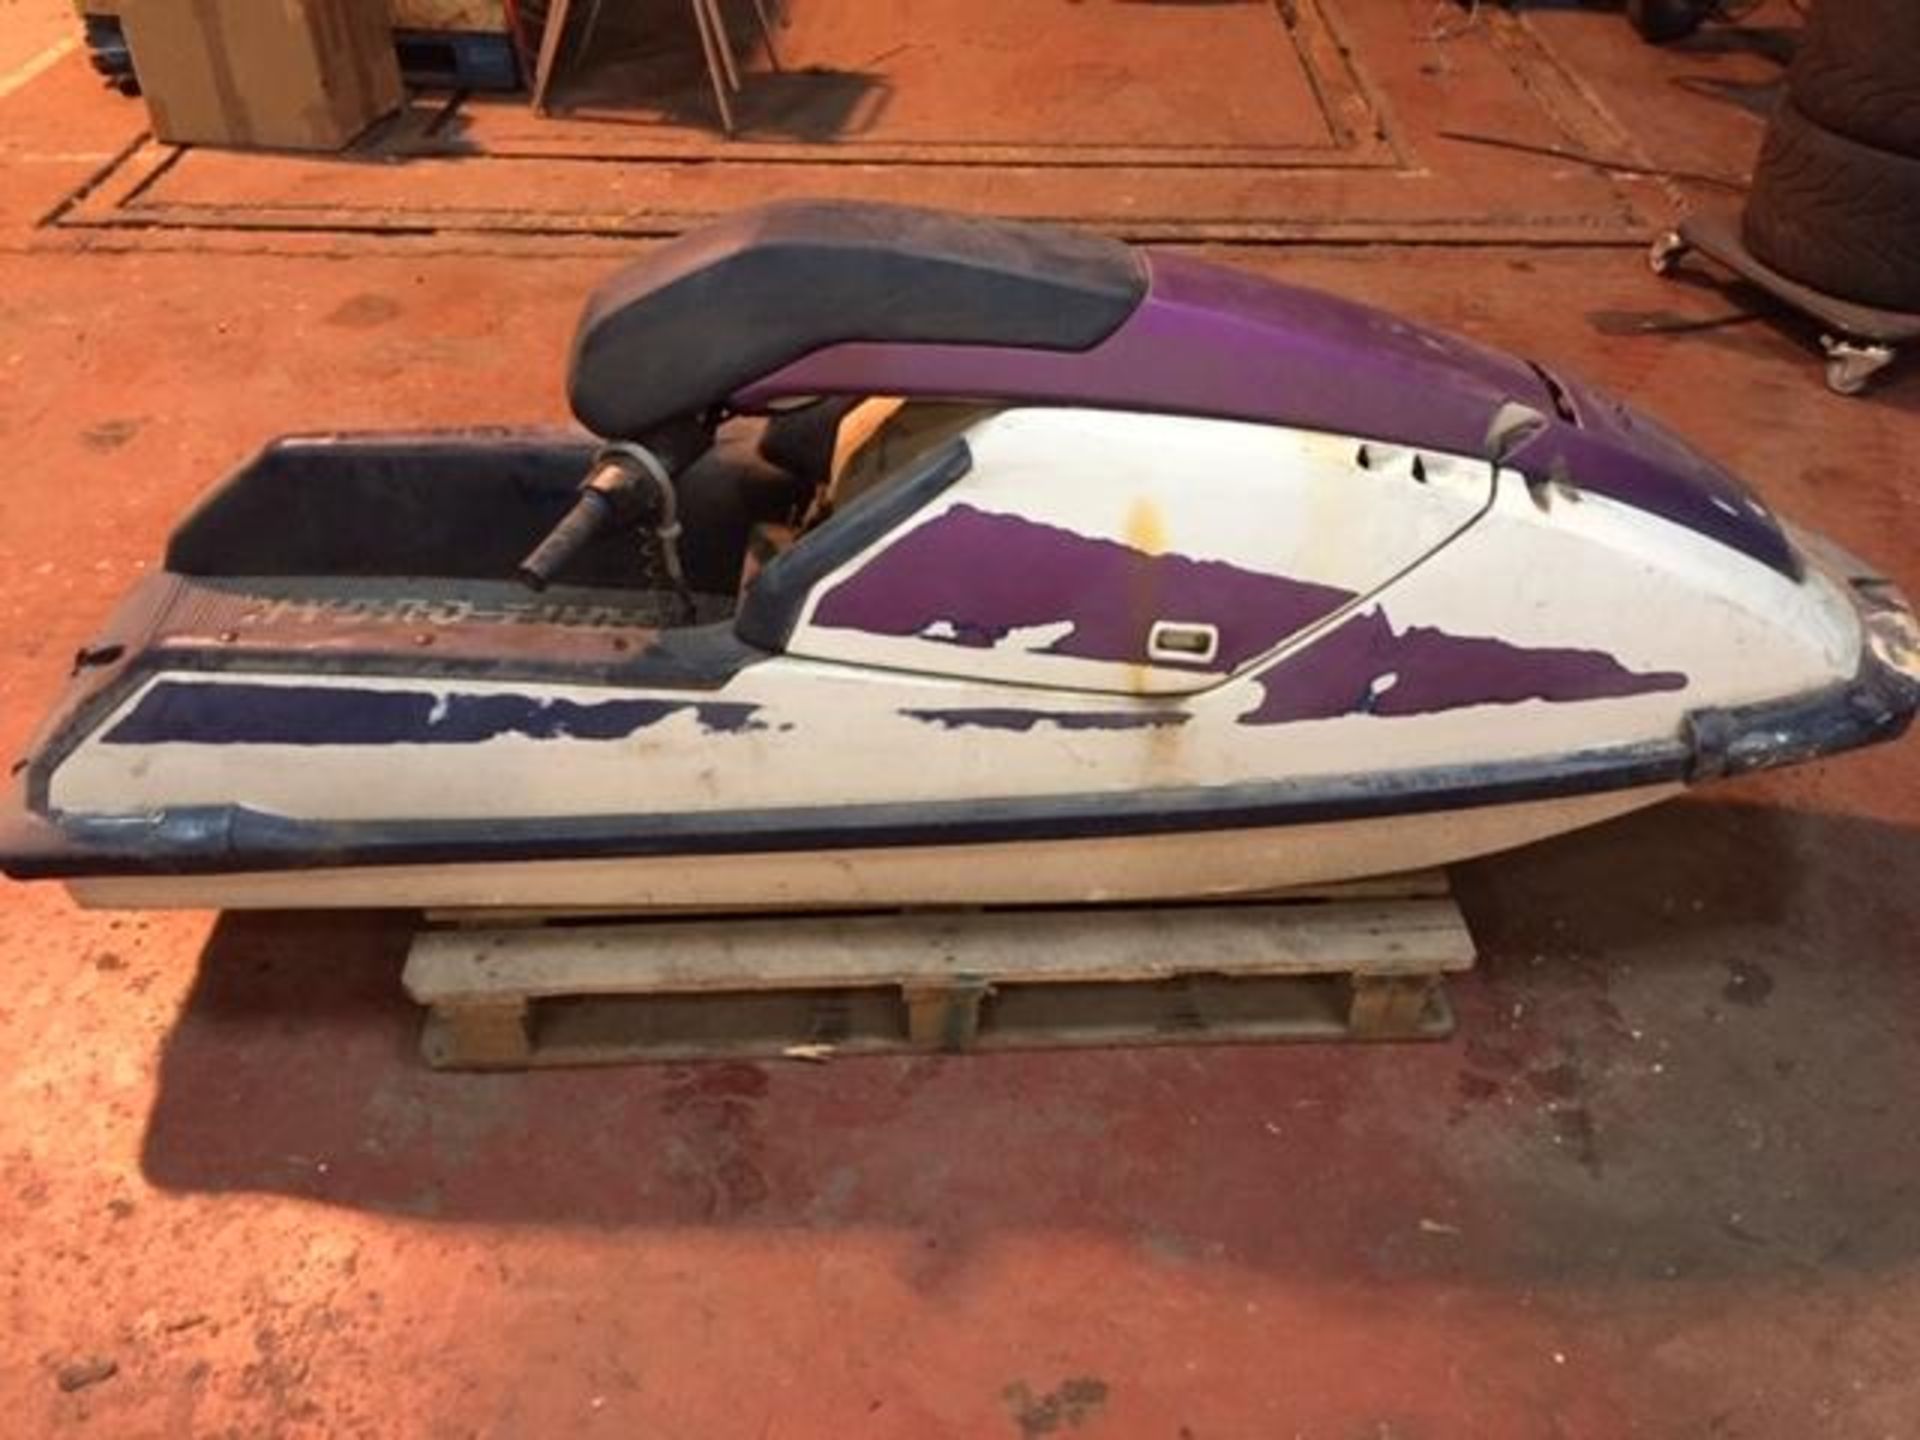 Kawasaki 650 twin Jet ski two stroke just got ready to be painted as in rub down